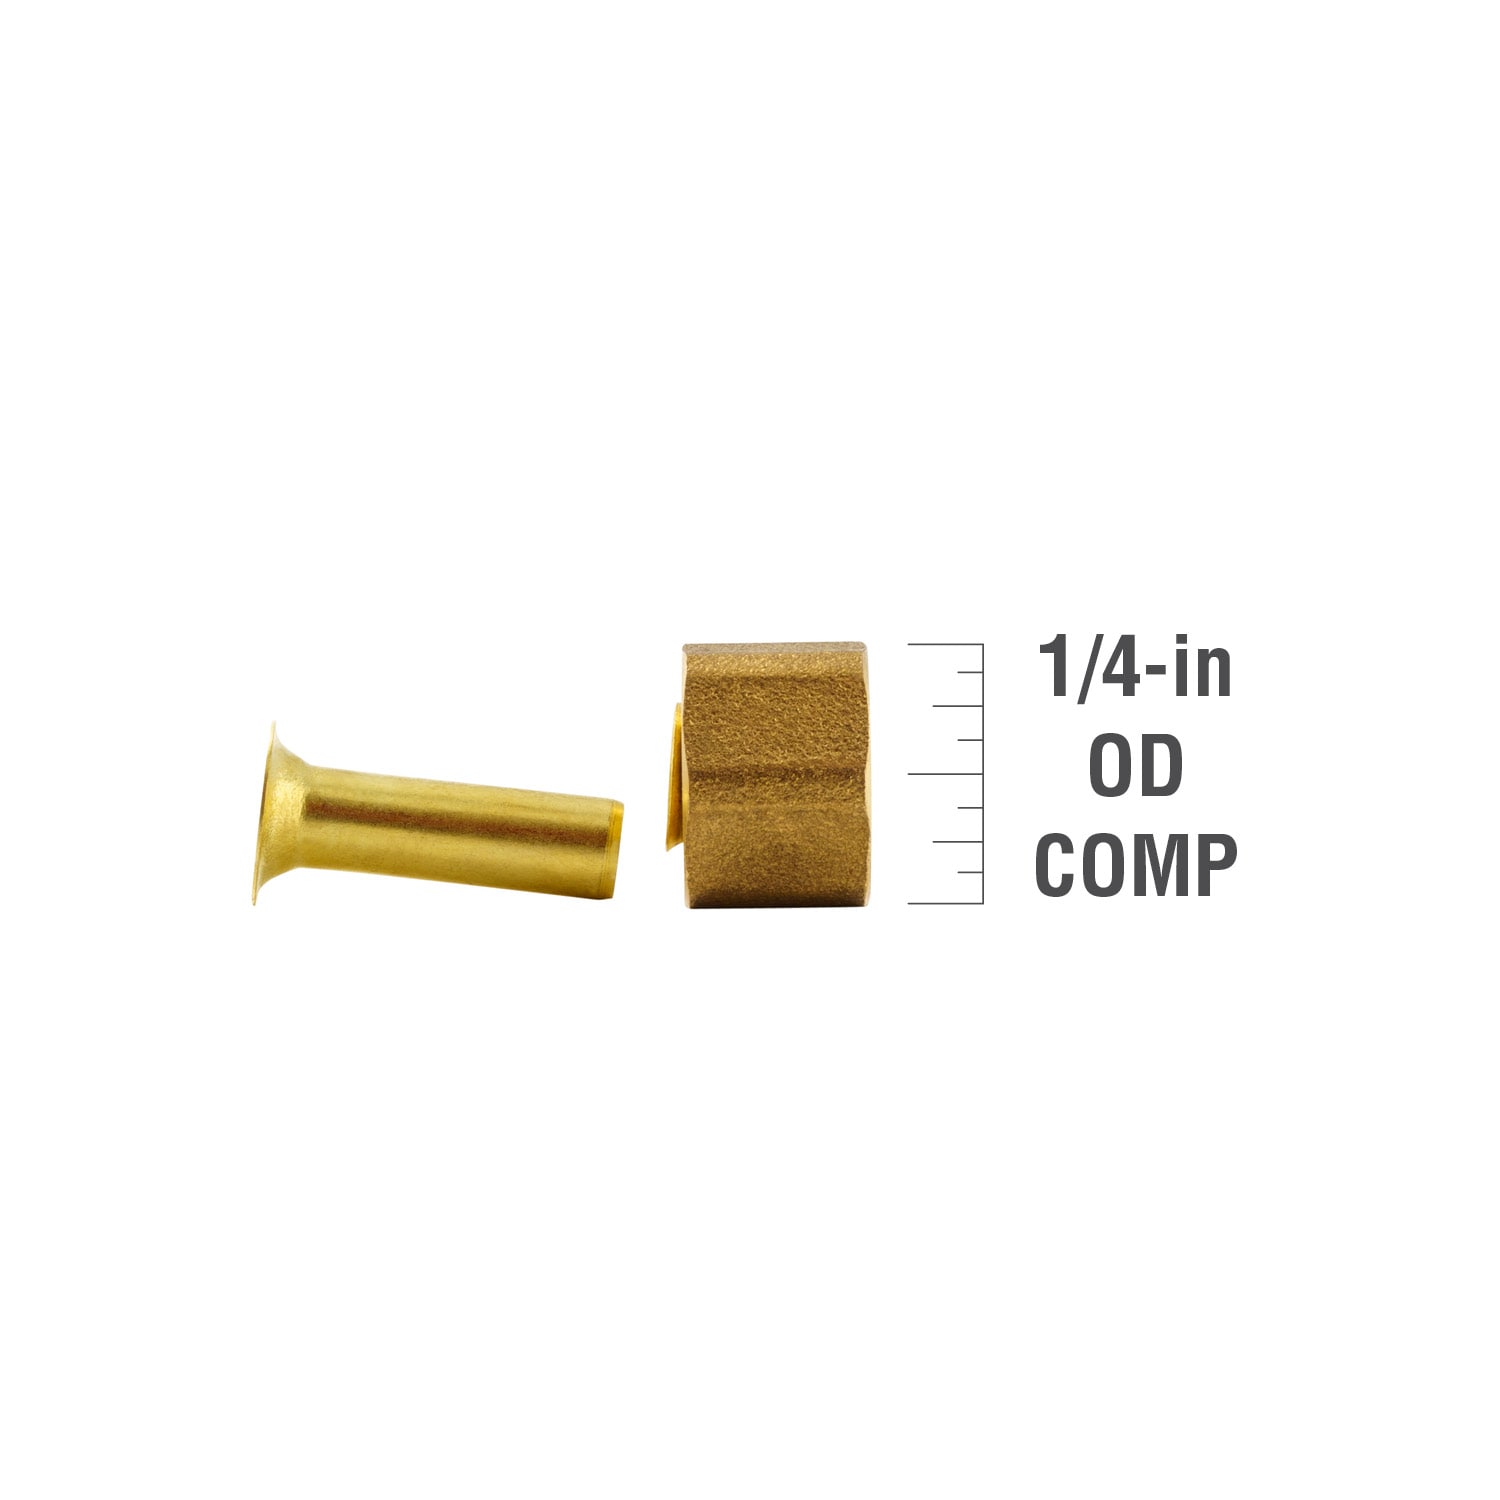 2 Pack 1/4 Compression Nut & Ferrule Combo for 1/4 OD Tube Brass Sleeve  Nut